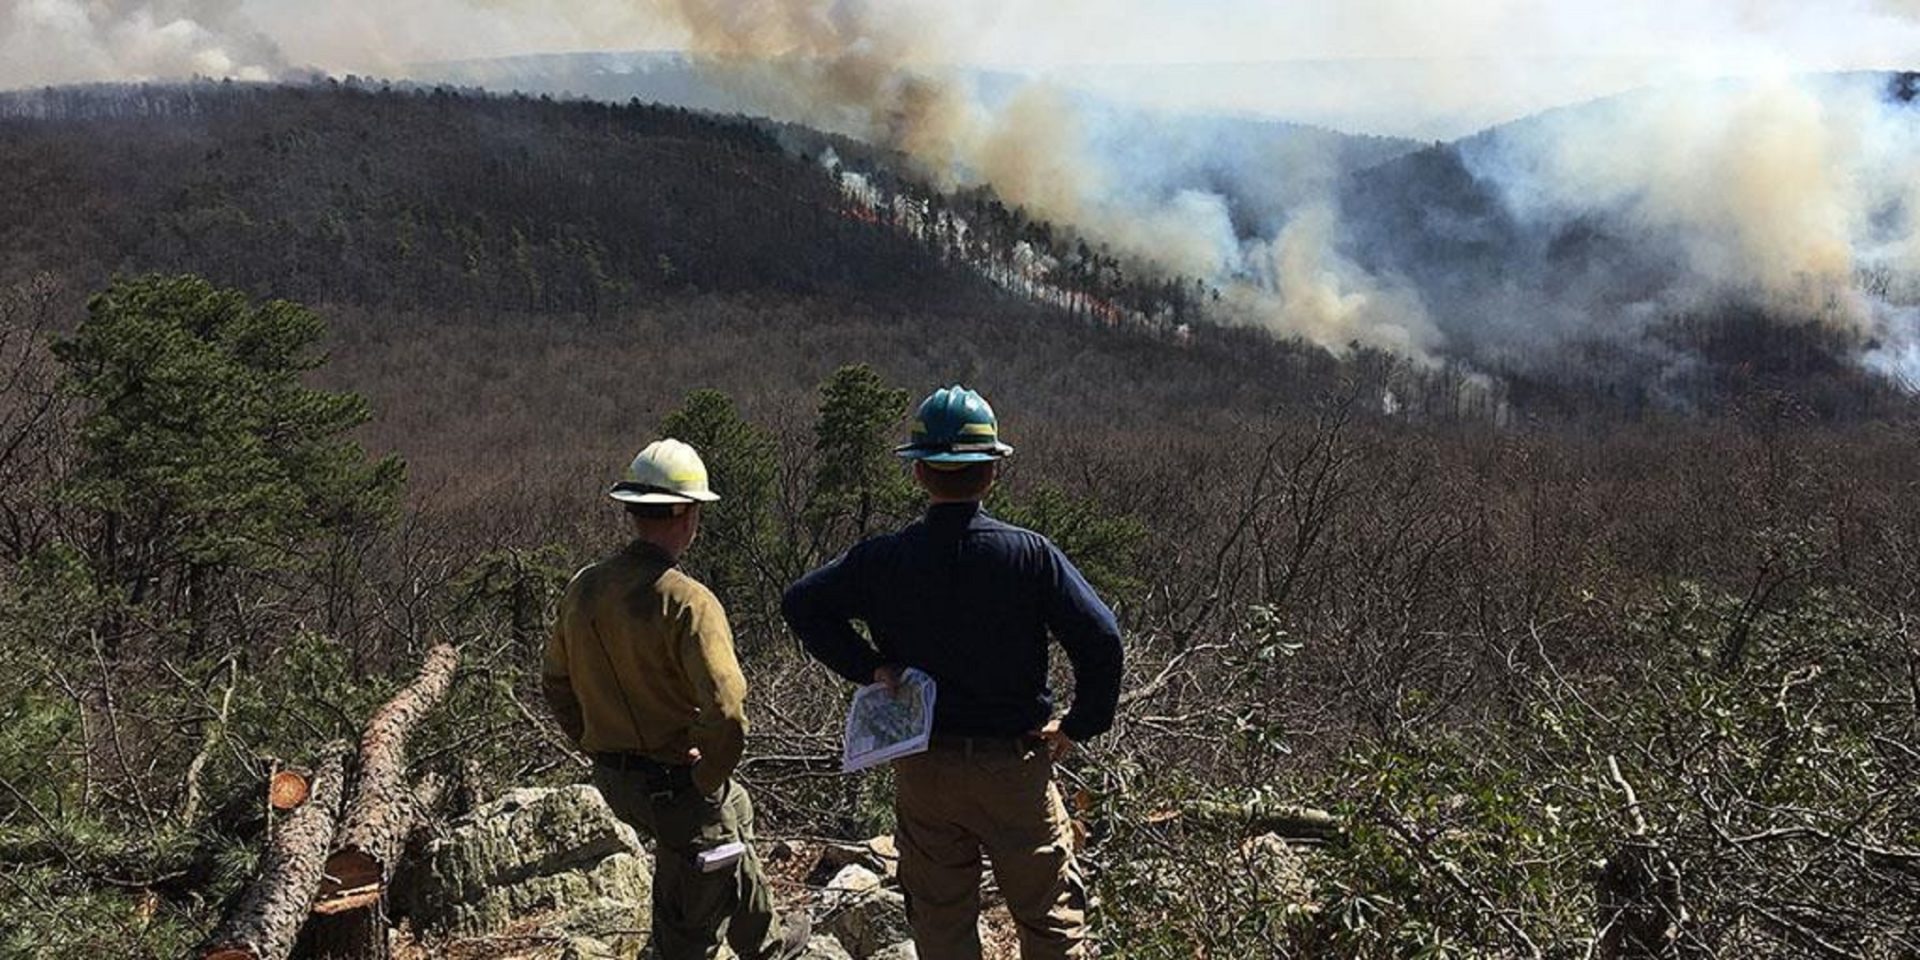 This file photo shows a prescribed burn undertaken by the Department of Conservation and Natural Resources.